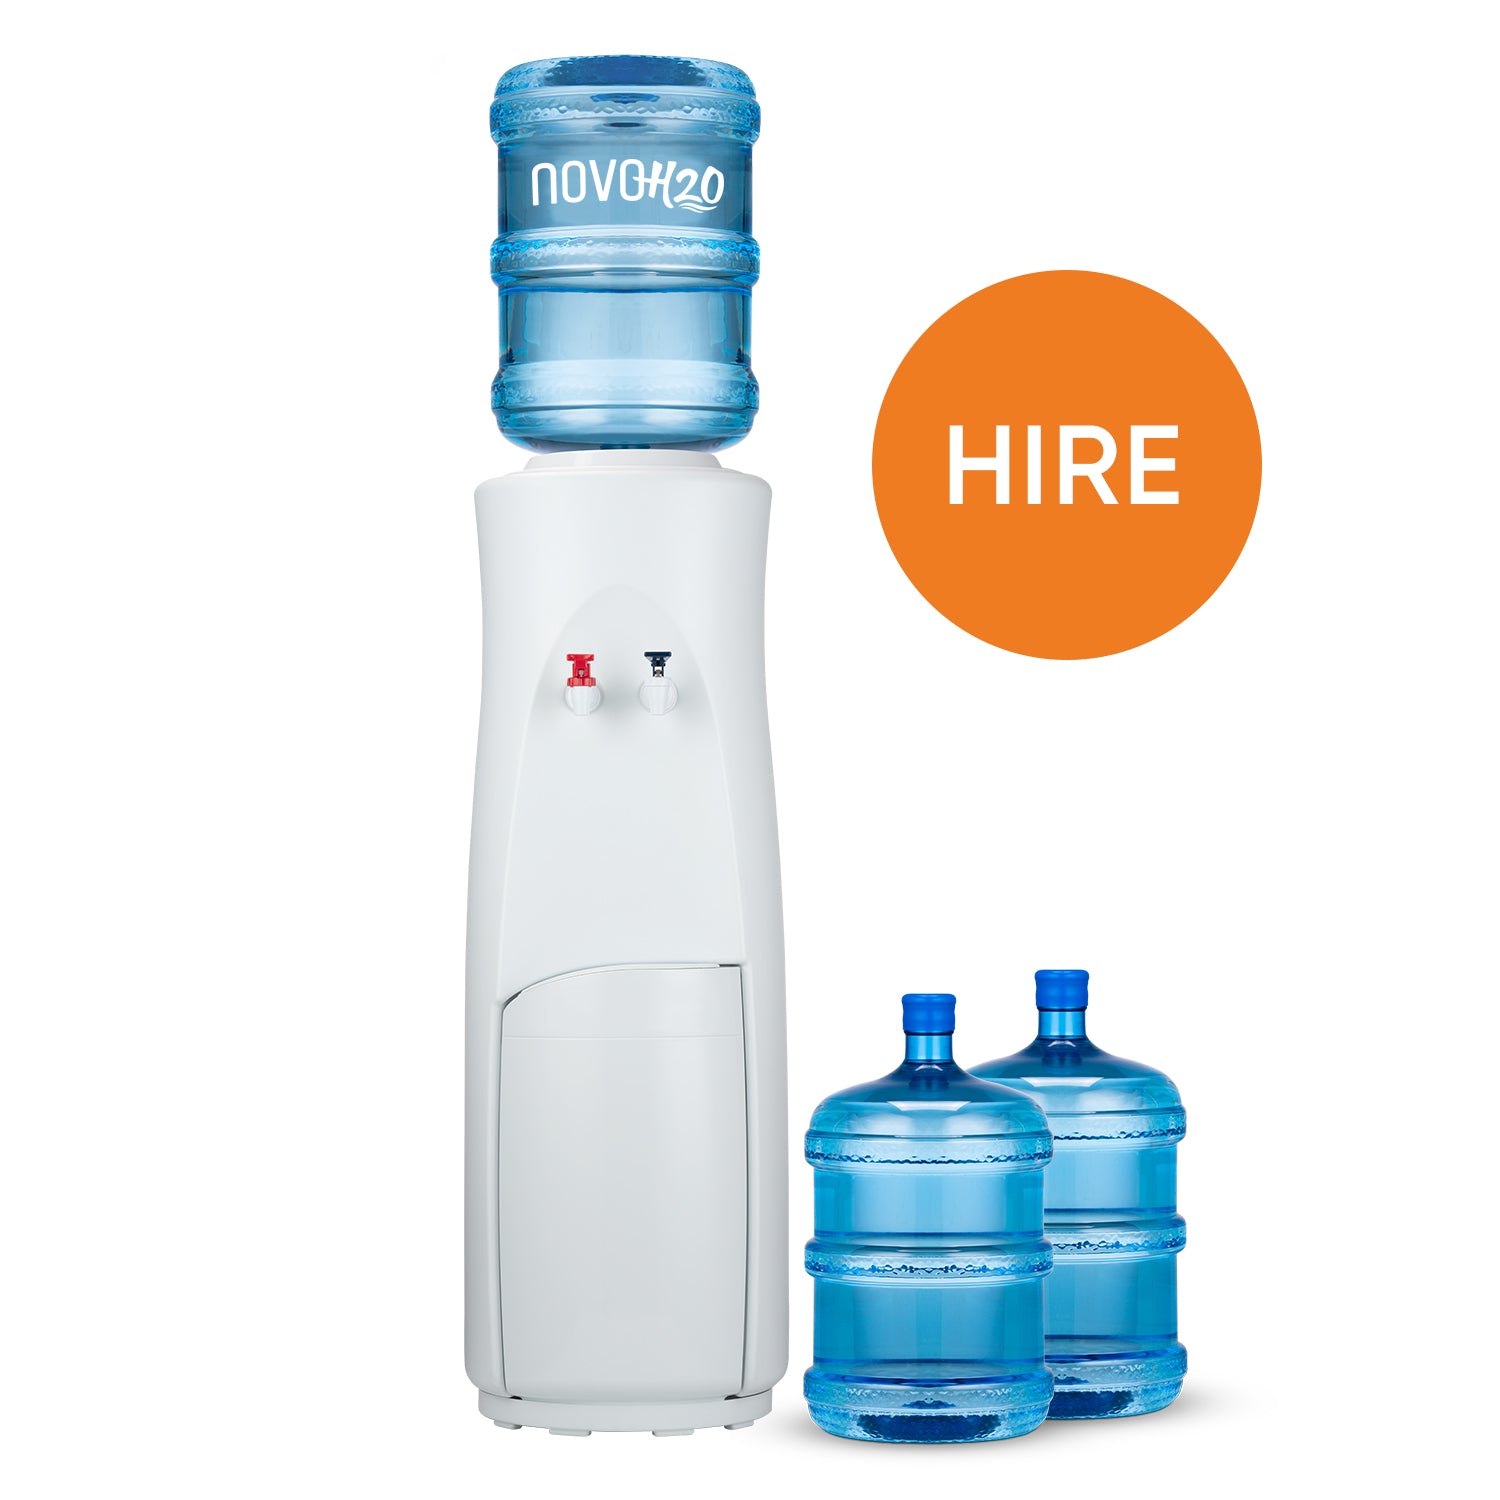 Hire Water Coolers in Sydney